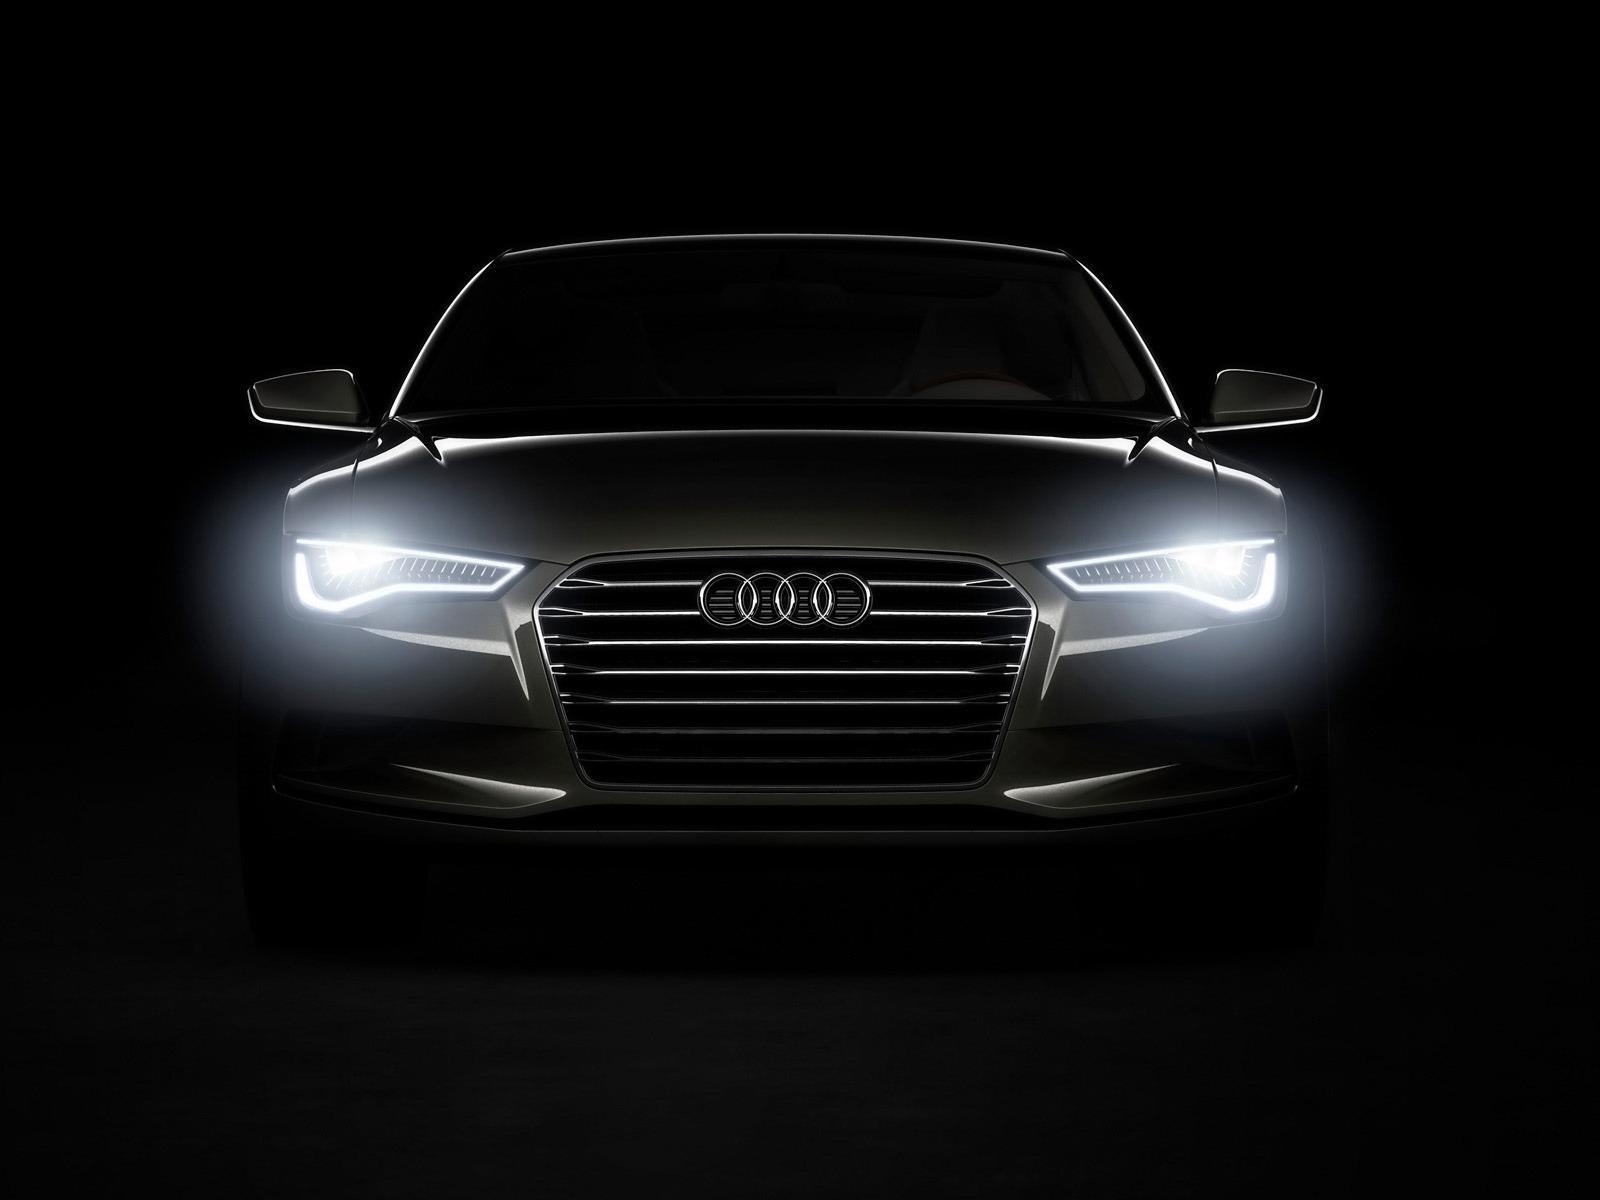 Audi A7 Headlights for 1600 x 1200 resolution